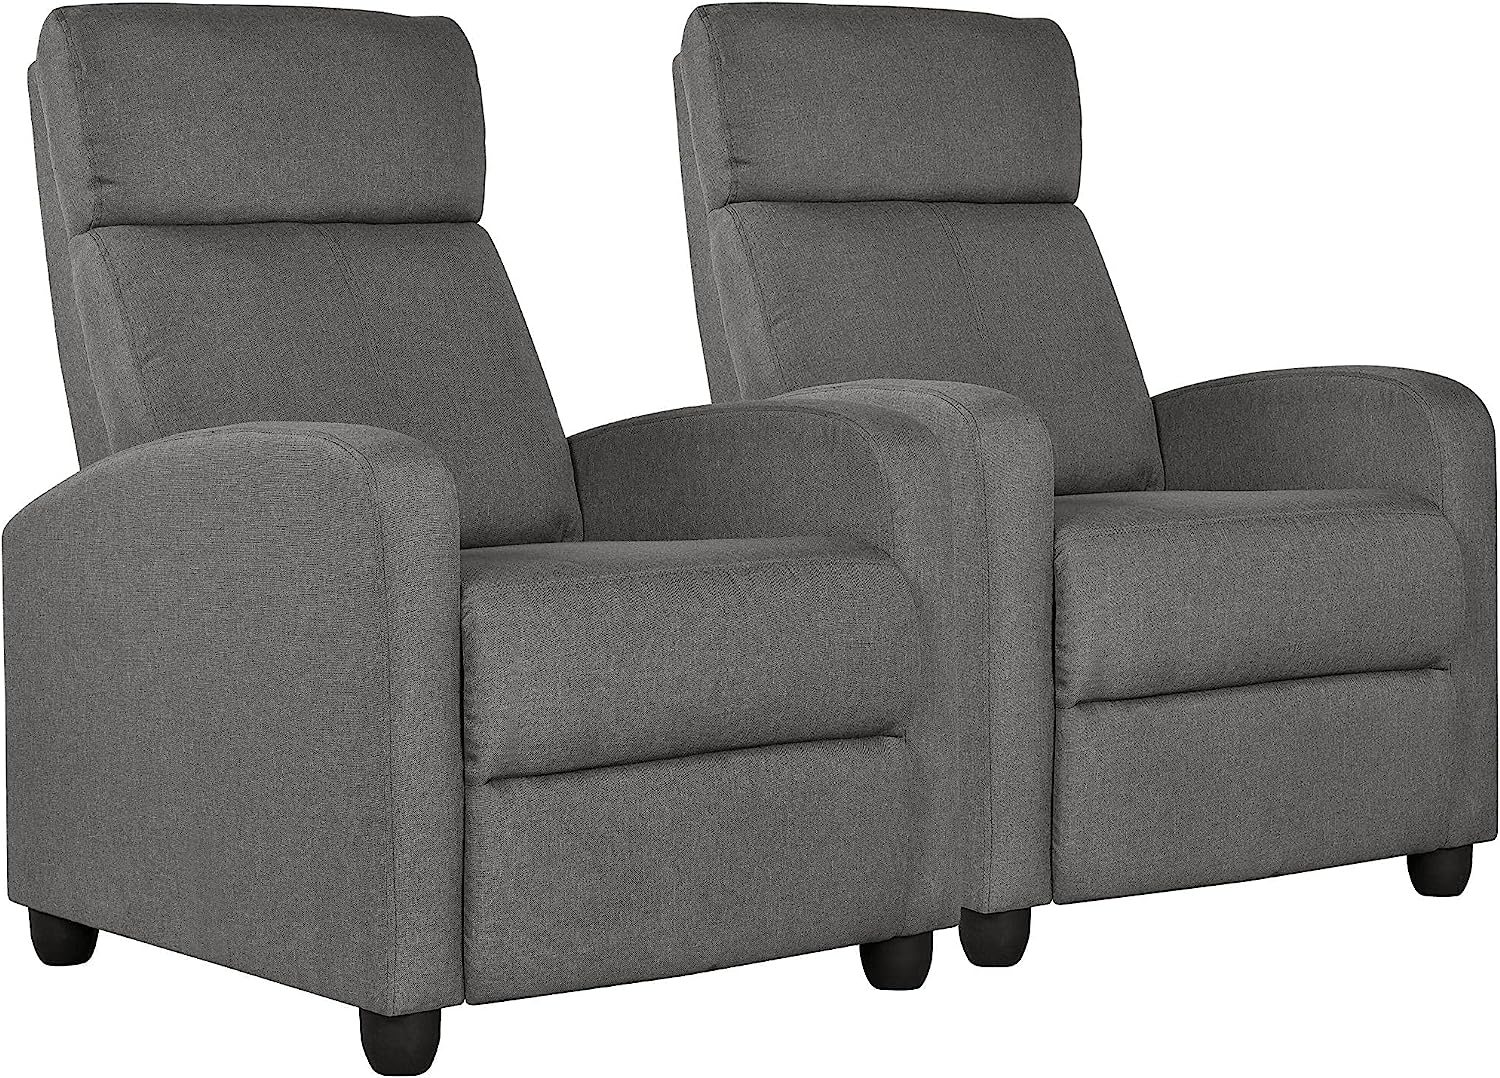 Yaheetech 2-Seat Fabric Pushback Recliner Chair Living [...]